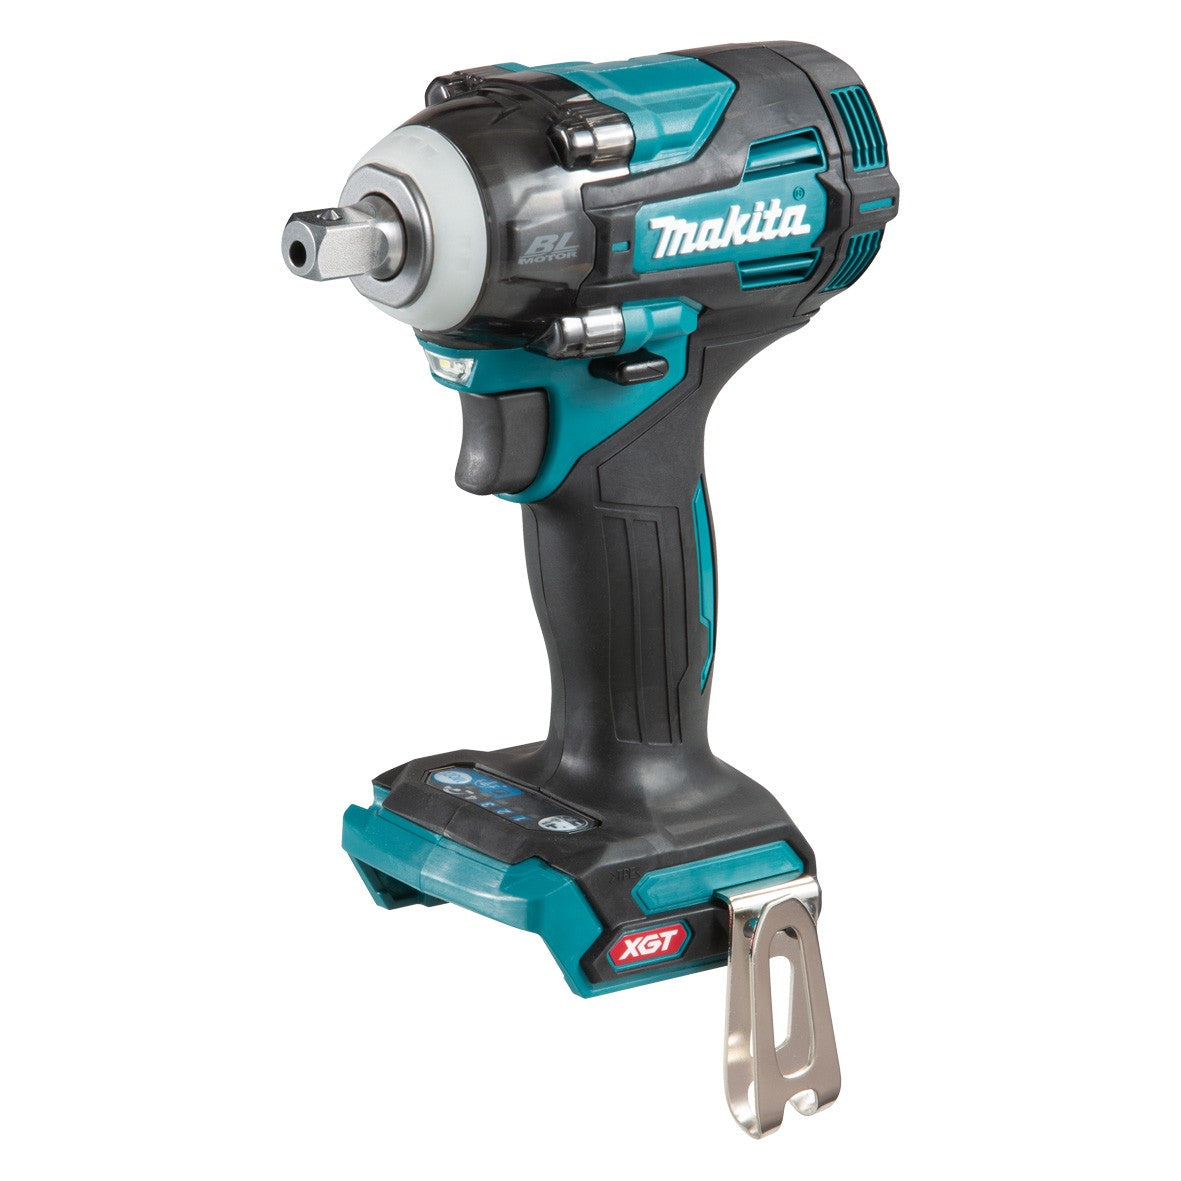 40V 1/2" Brushless Pin Detent Impact Wrench Bare (Tool Only) TW005GZ by Makita